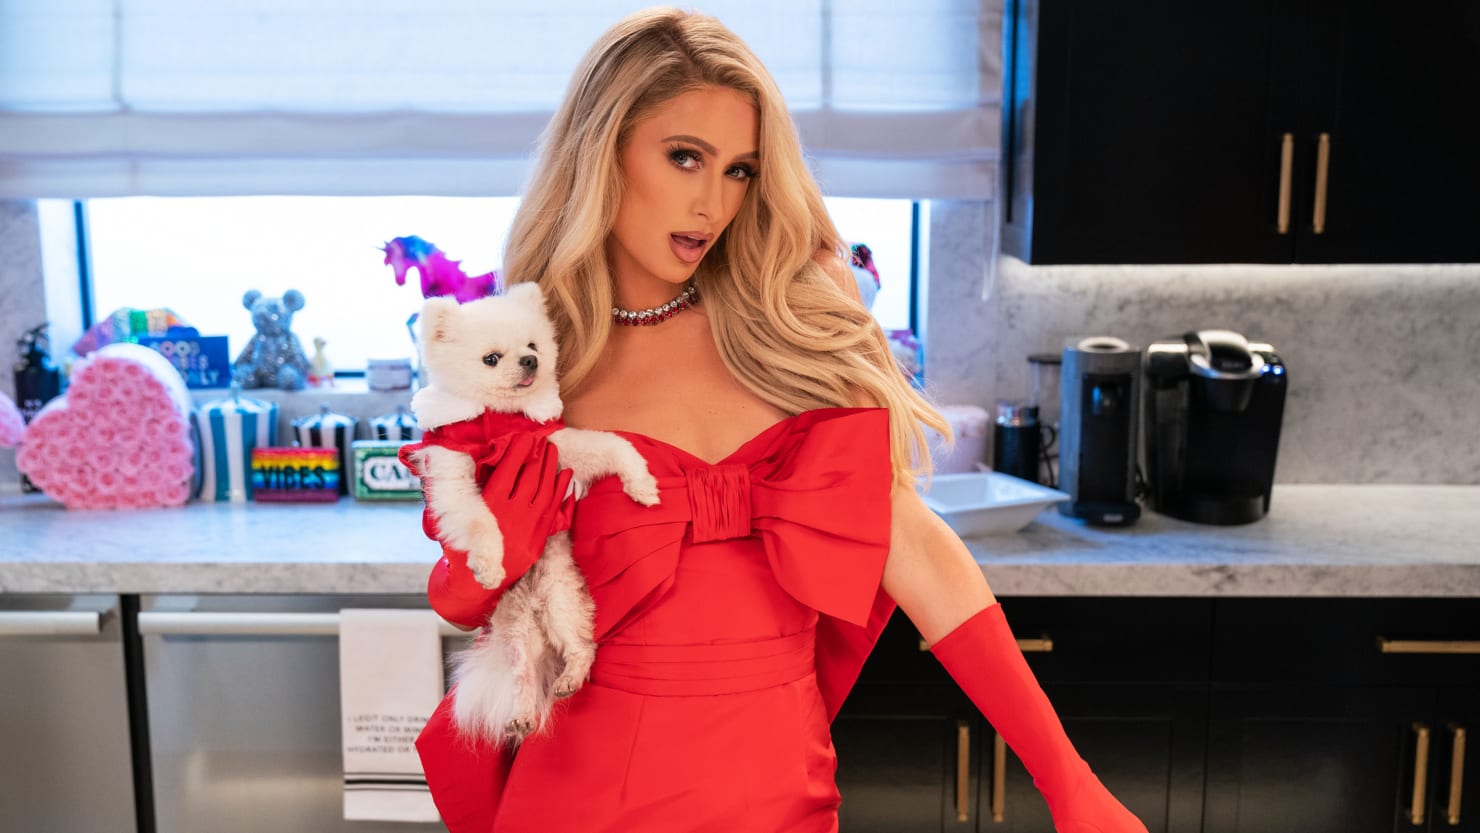 Paris Hilton Implores You to Add Pink to Your Kitchen